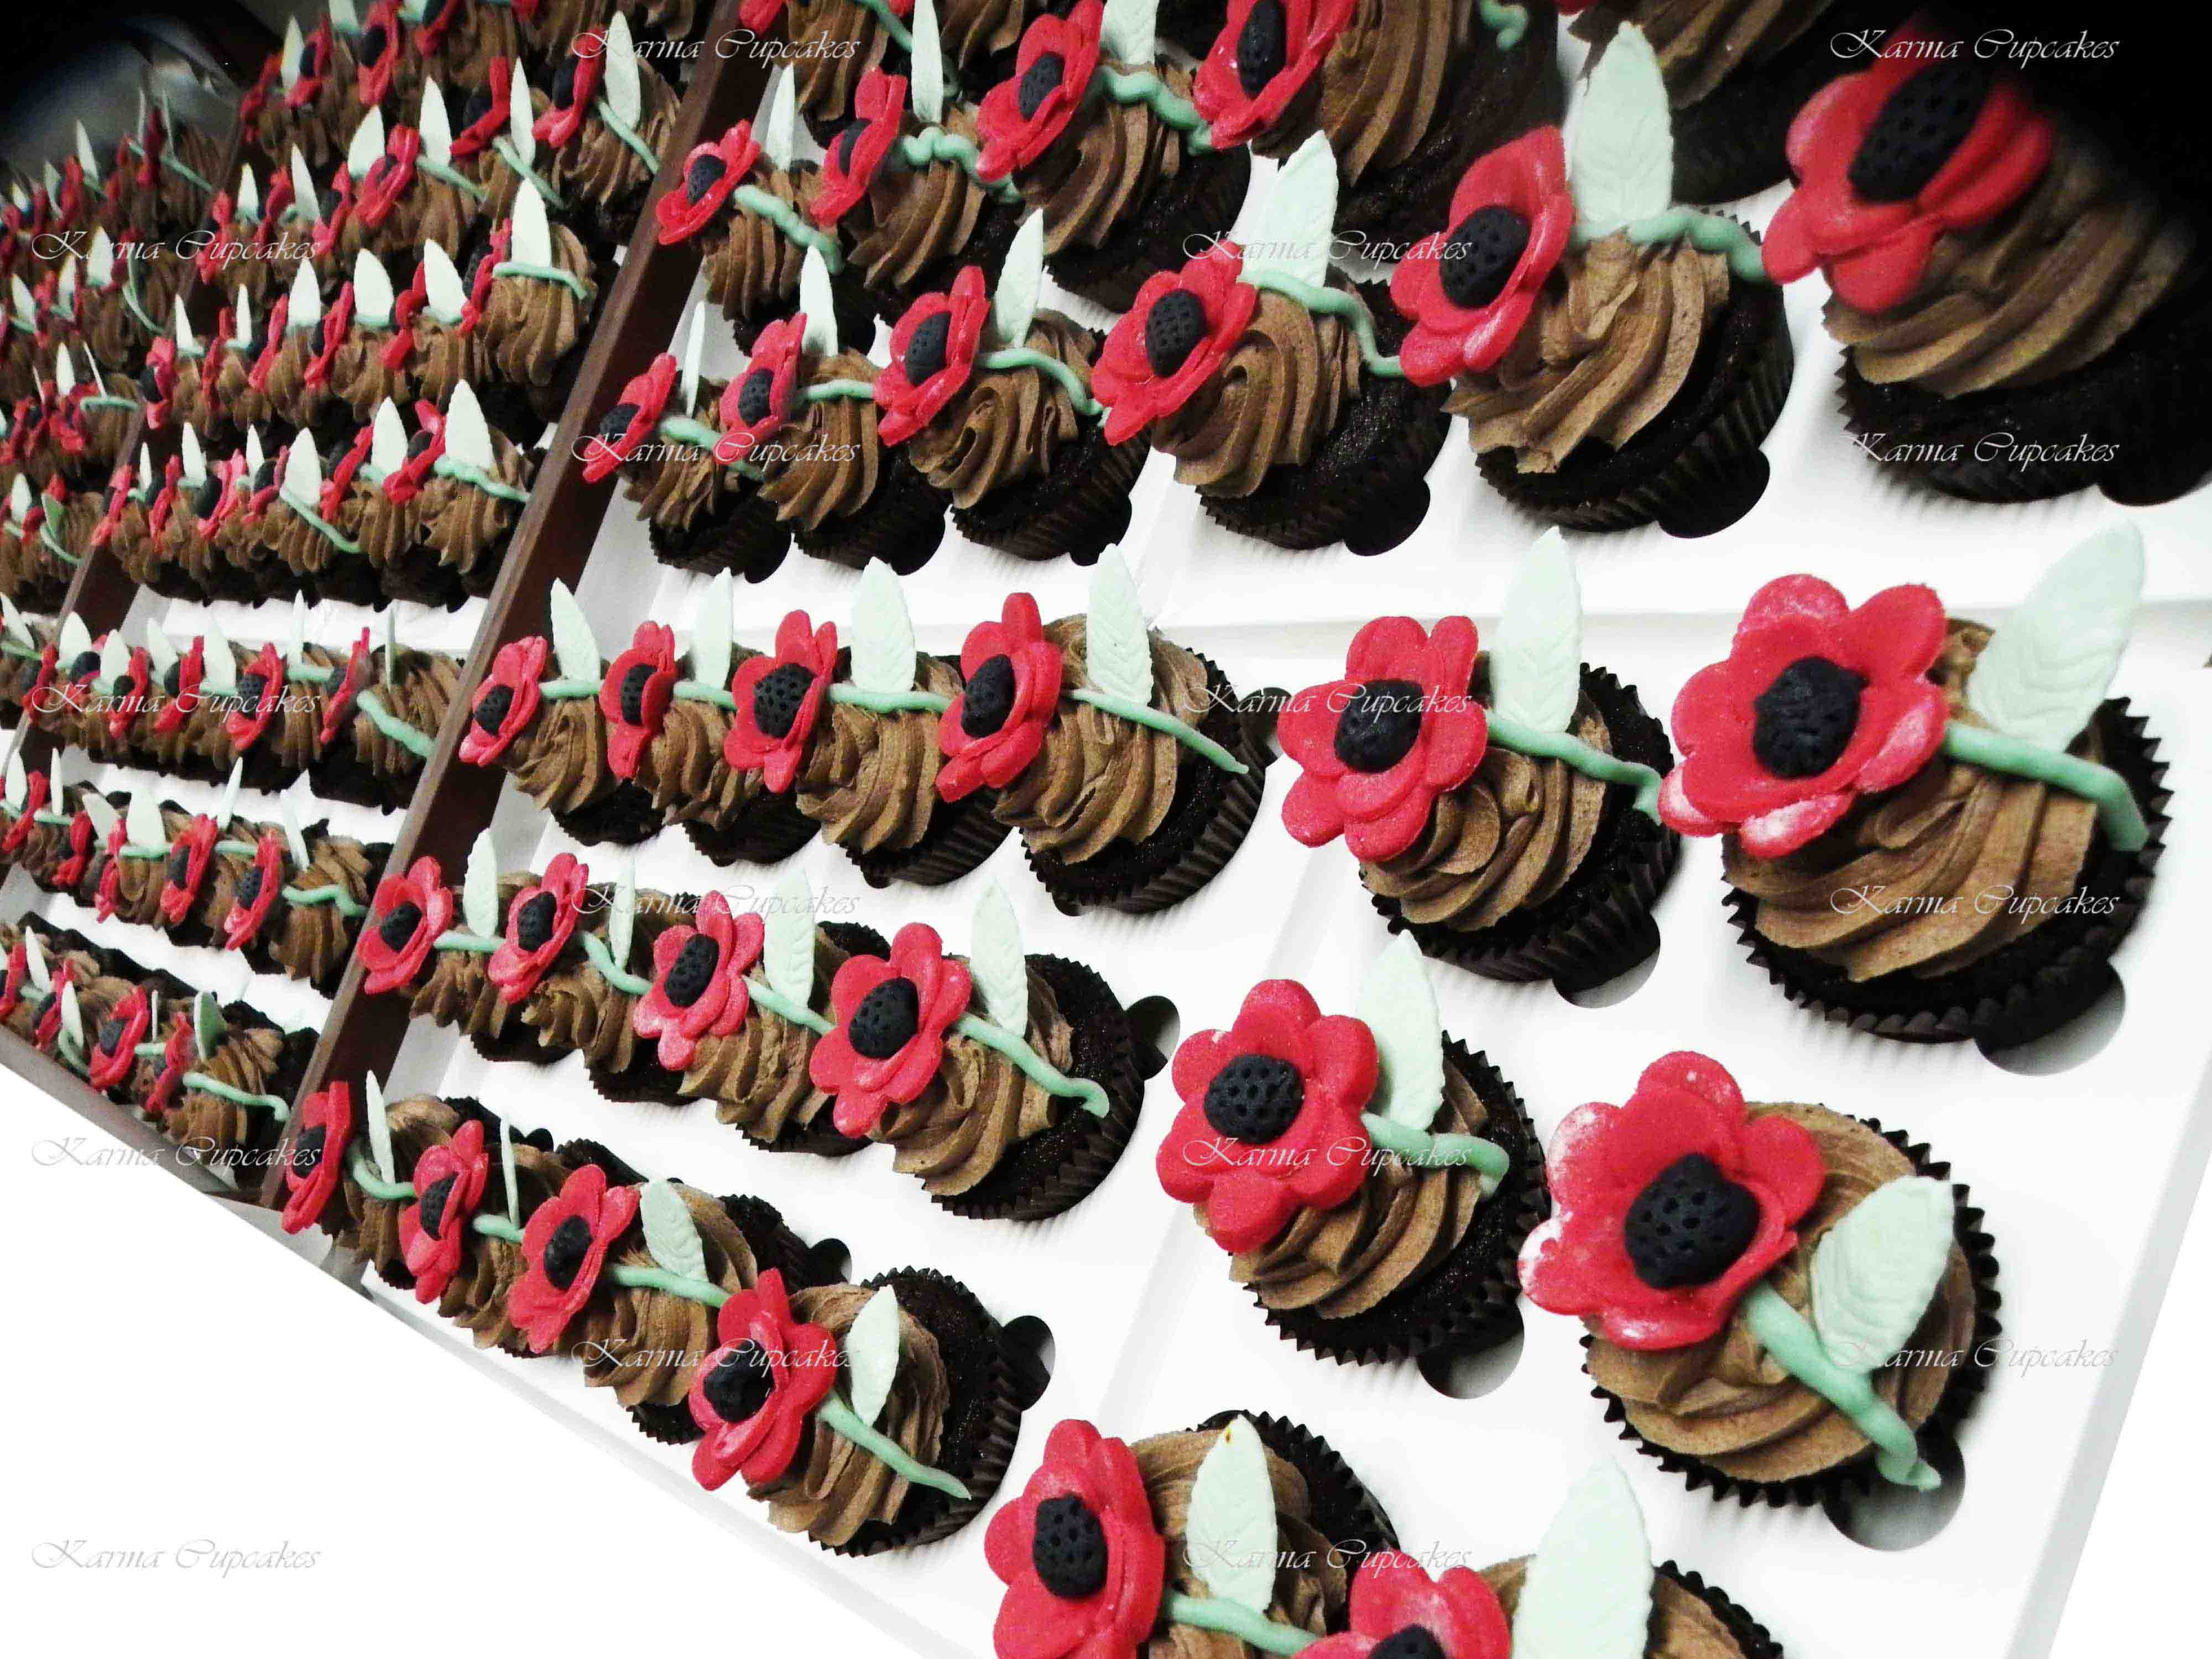 Charity fundraising cupcakes